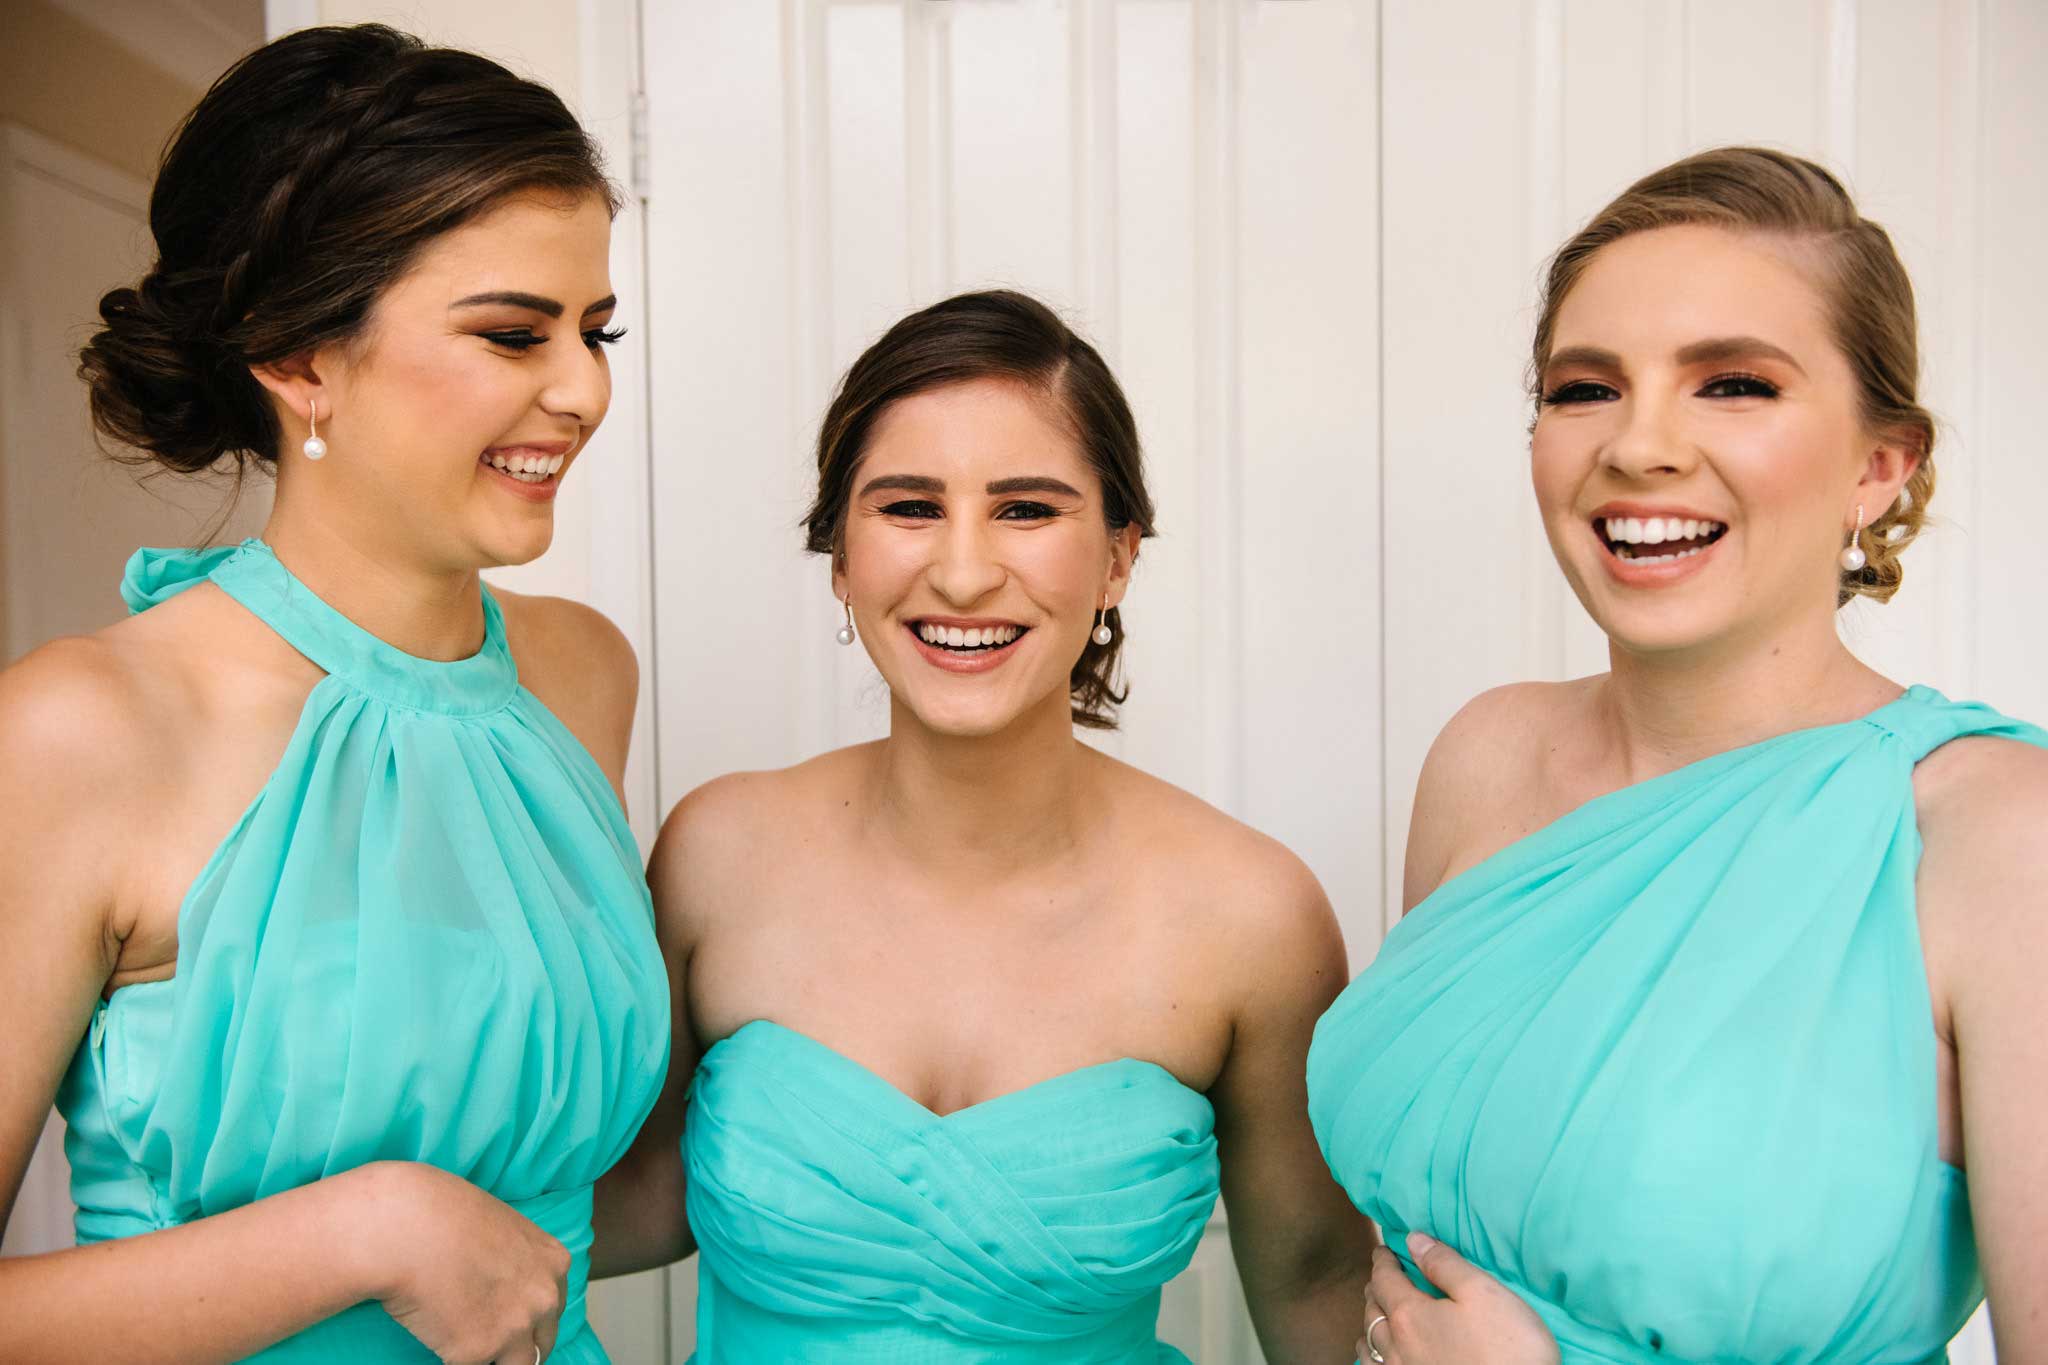 Smiling bridesmaids laugh as they are getting ready for the wedding day